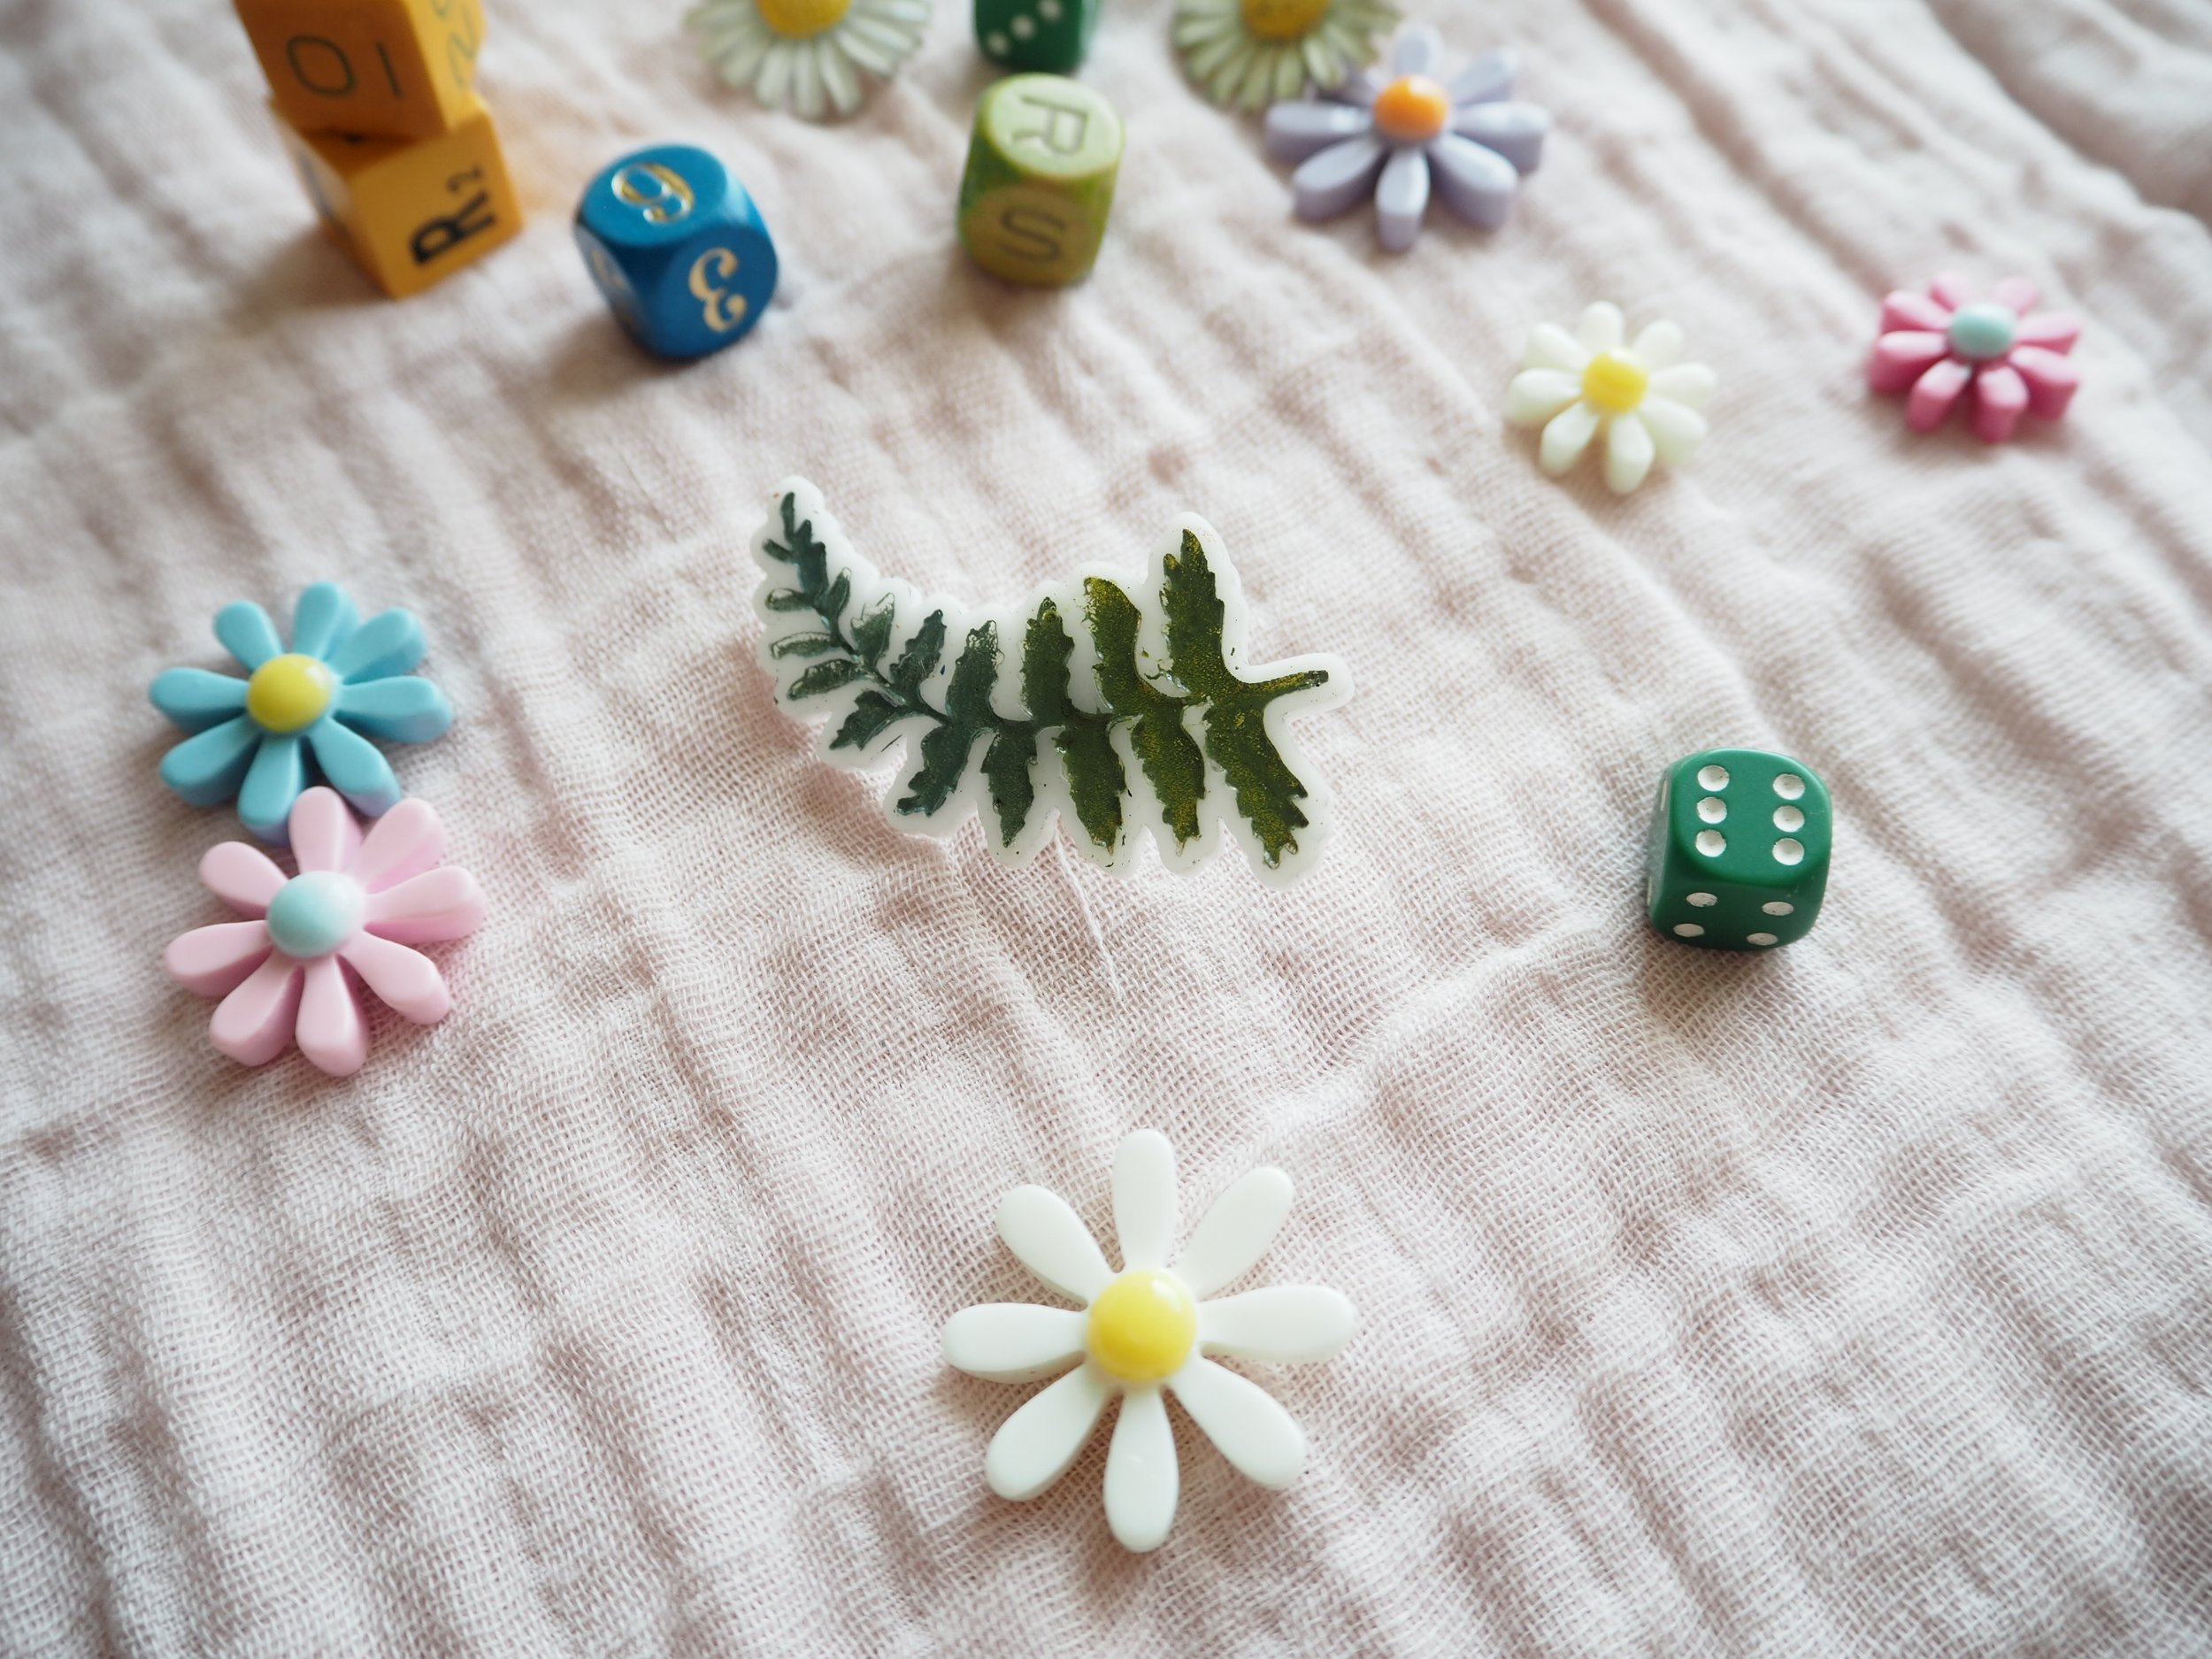 New Acrylic Broach Pins in the SHOP_090291.JPG